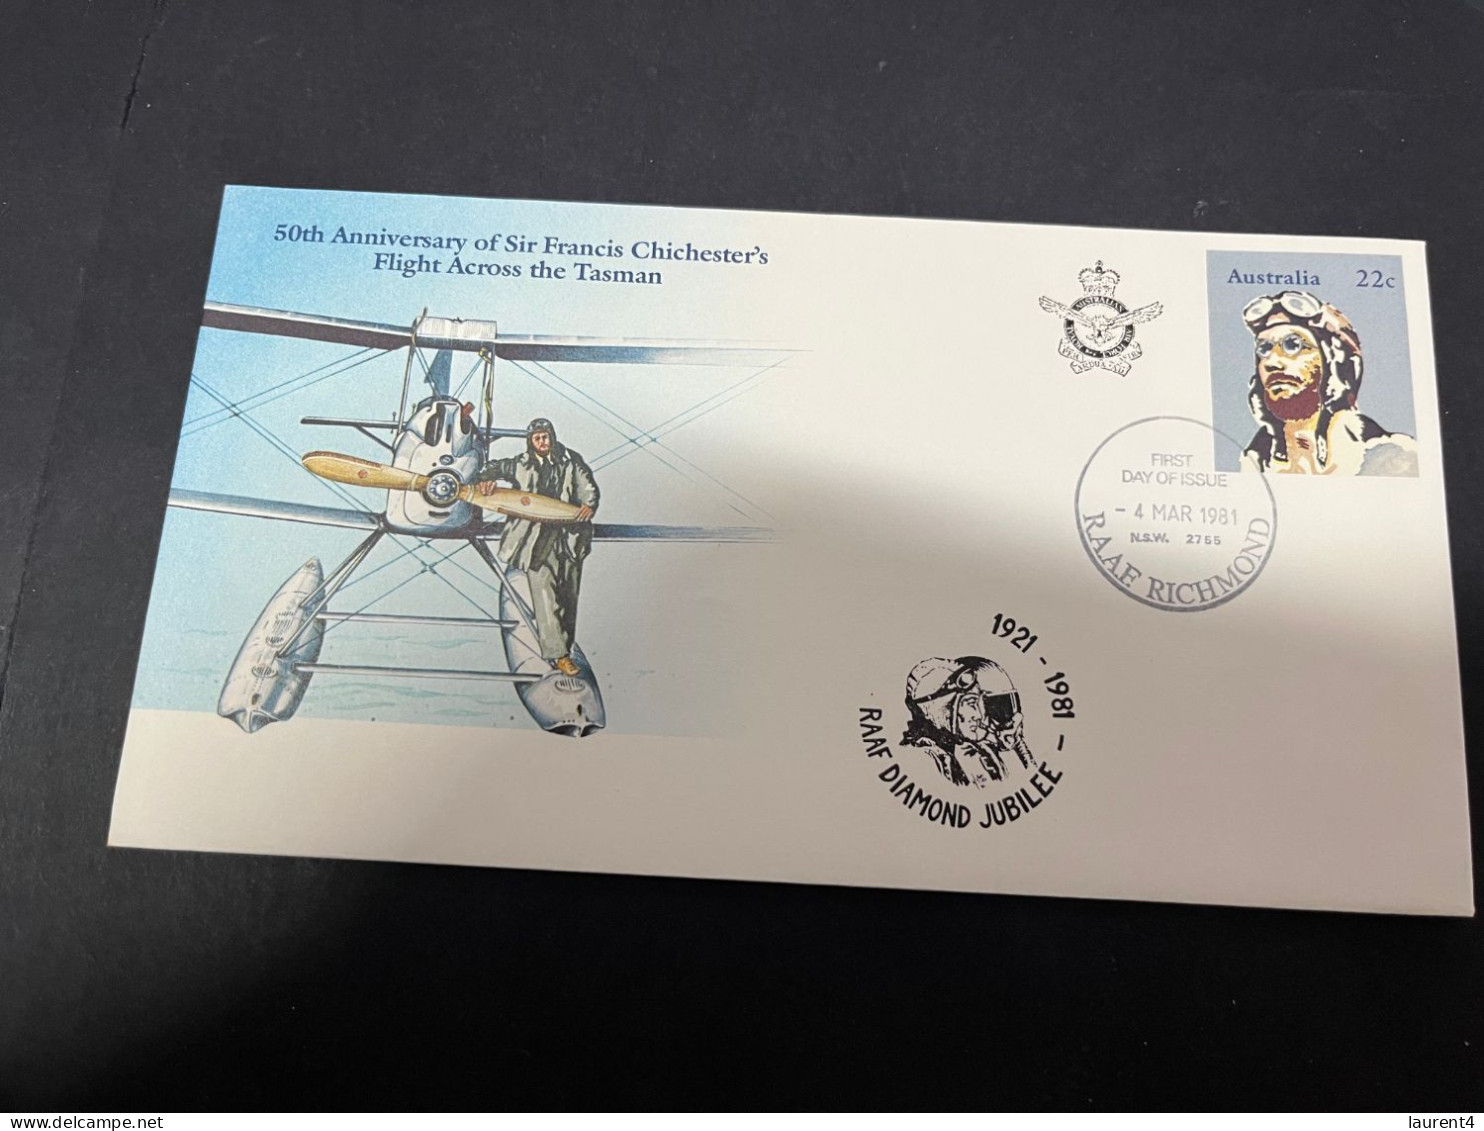 21-4-2024 (2 Z 39) Australia FDC Cover - 1981 - RAAF Diamond Jubillee (Sir Francis Chichester) 2 Covers - Primo Giorno D'emissione (FDC)